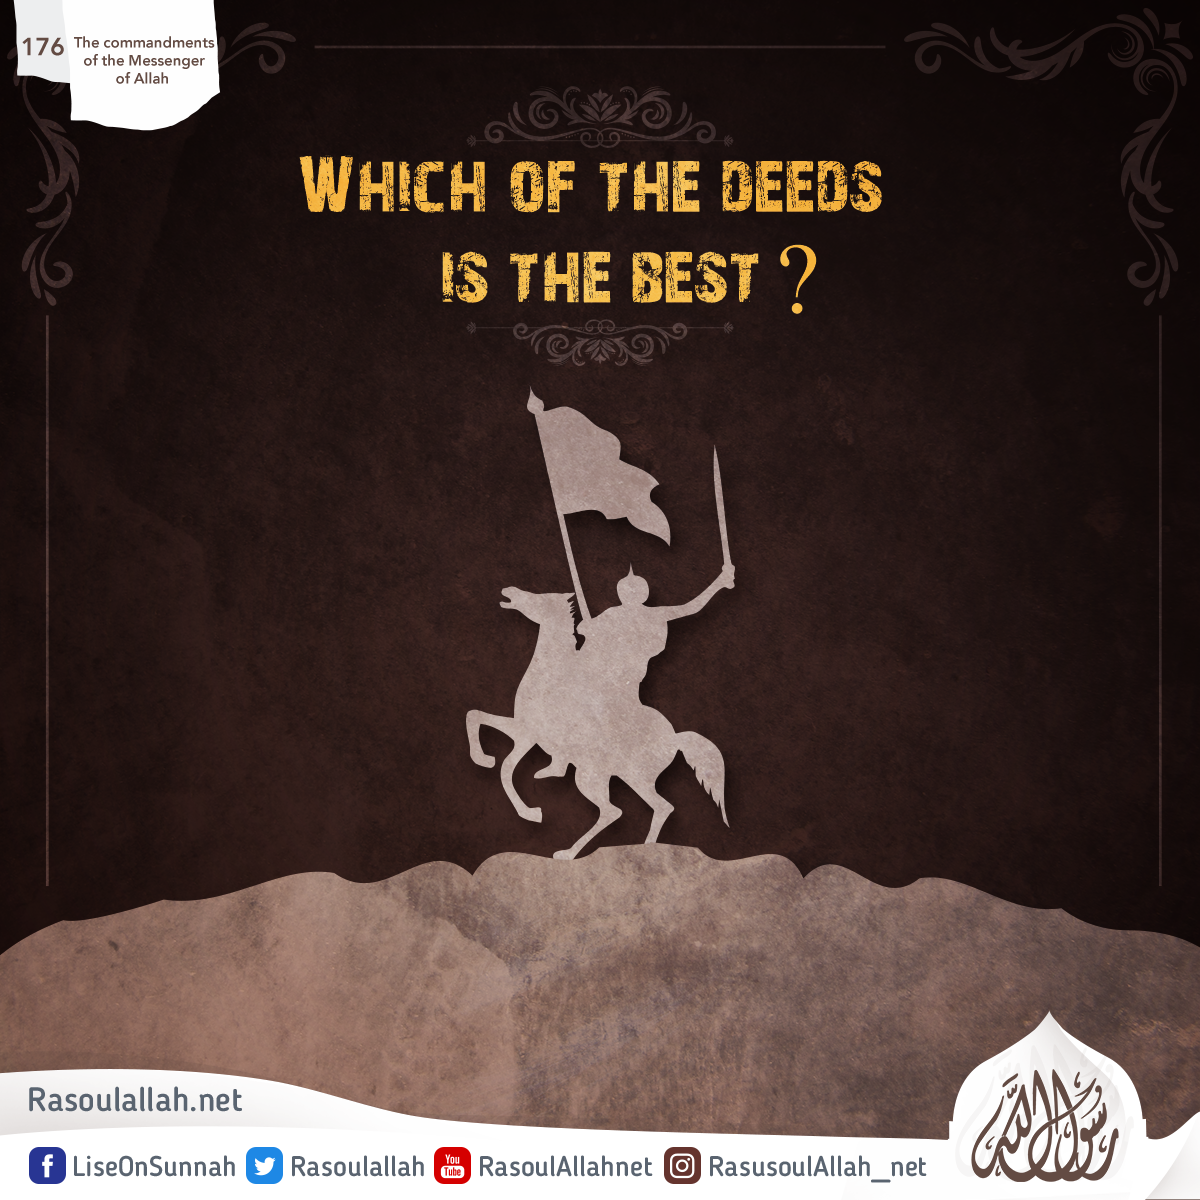 Which of the deeds is the best?